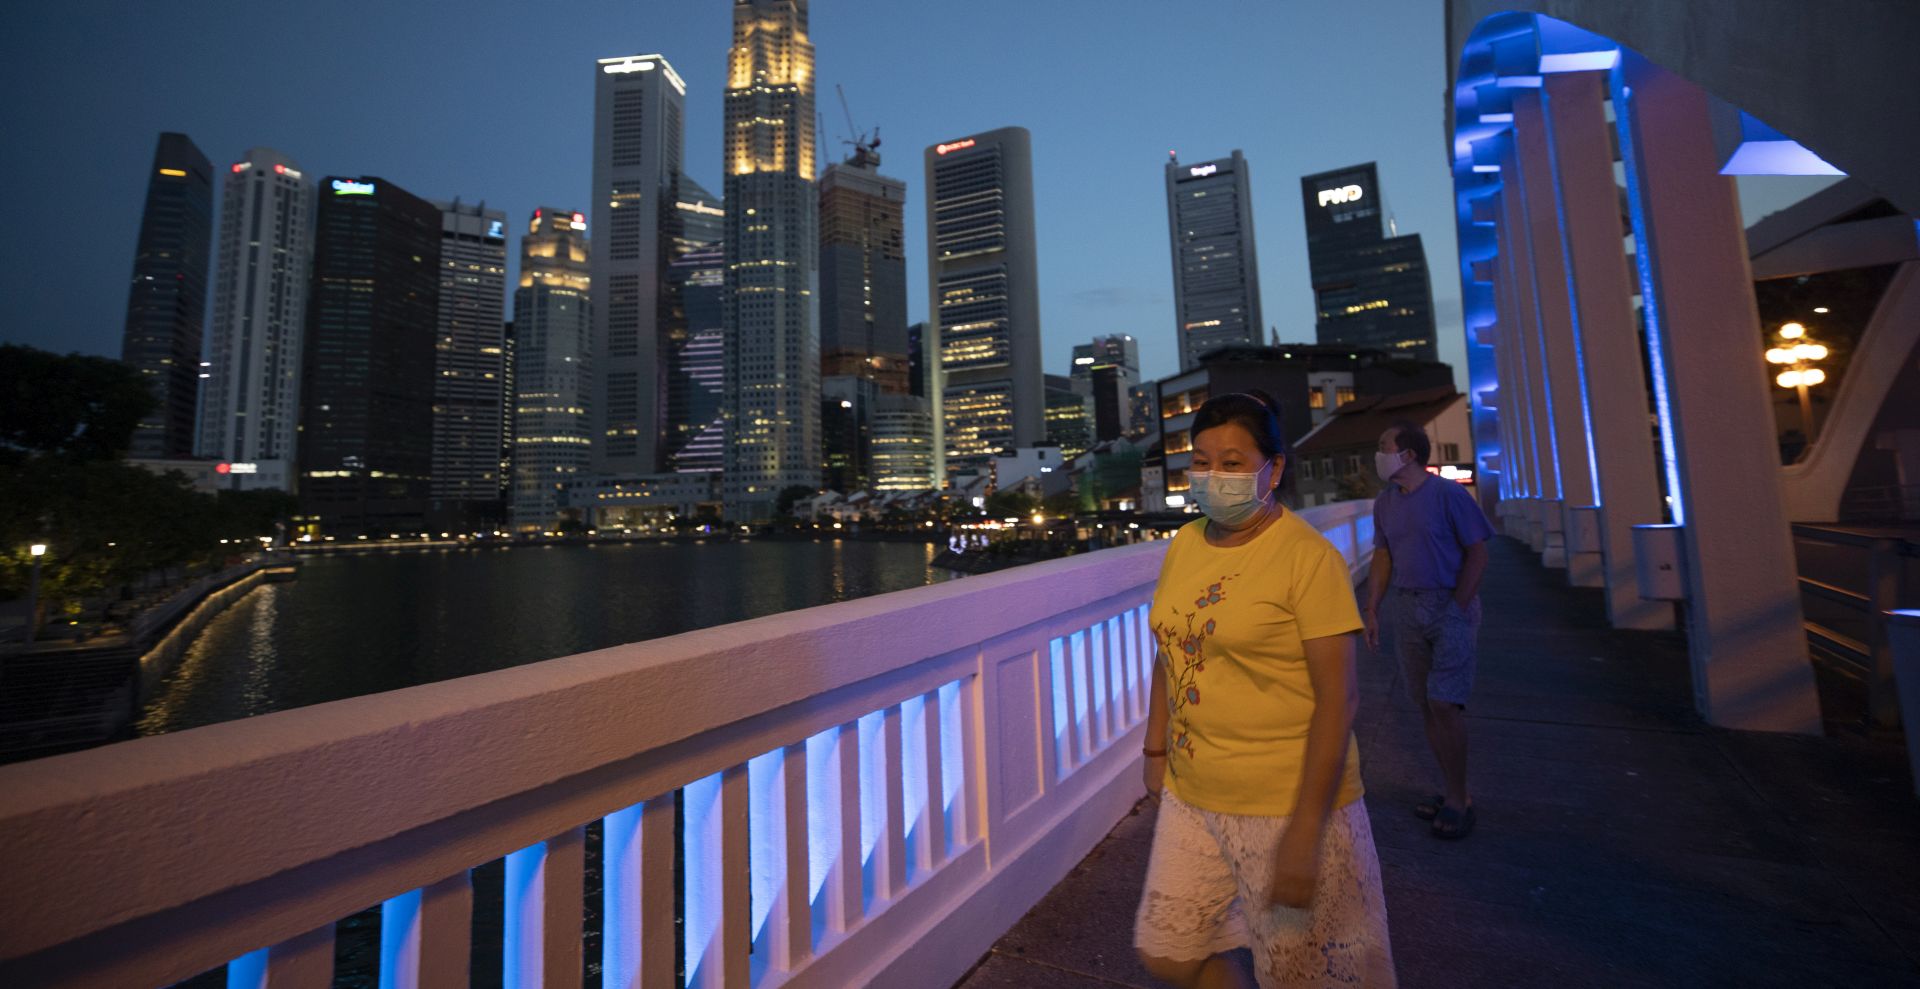 epa08370314 People wearing masks walk in the Central Business District in Singapore, 17 April 2020 (issued 18 April 2020), during the coronavirus disease (COVID-19) pandemic. Singapore on 18 April is on its 12th day into a month-long 'circuit breaker' period where non-essential services workplaces and schools are closed among measures to prevent the spread of the COVID-19 infectious disease.  EPA/HOW HWEE YOUNG